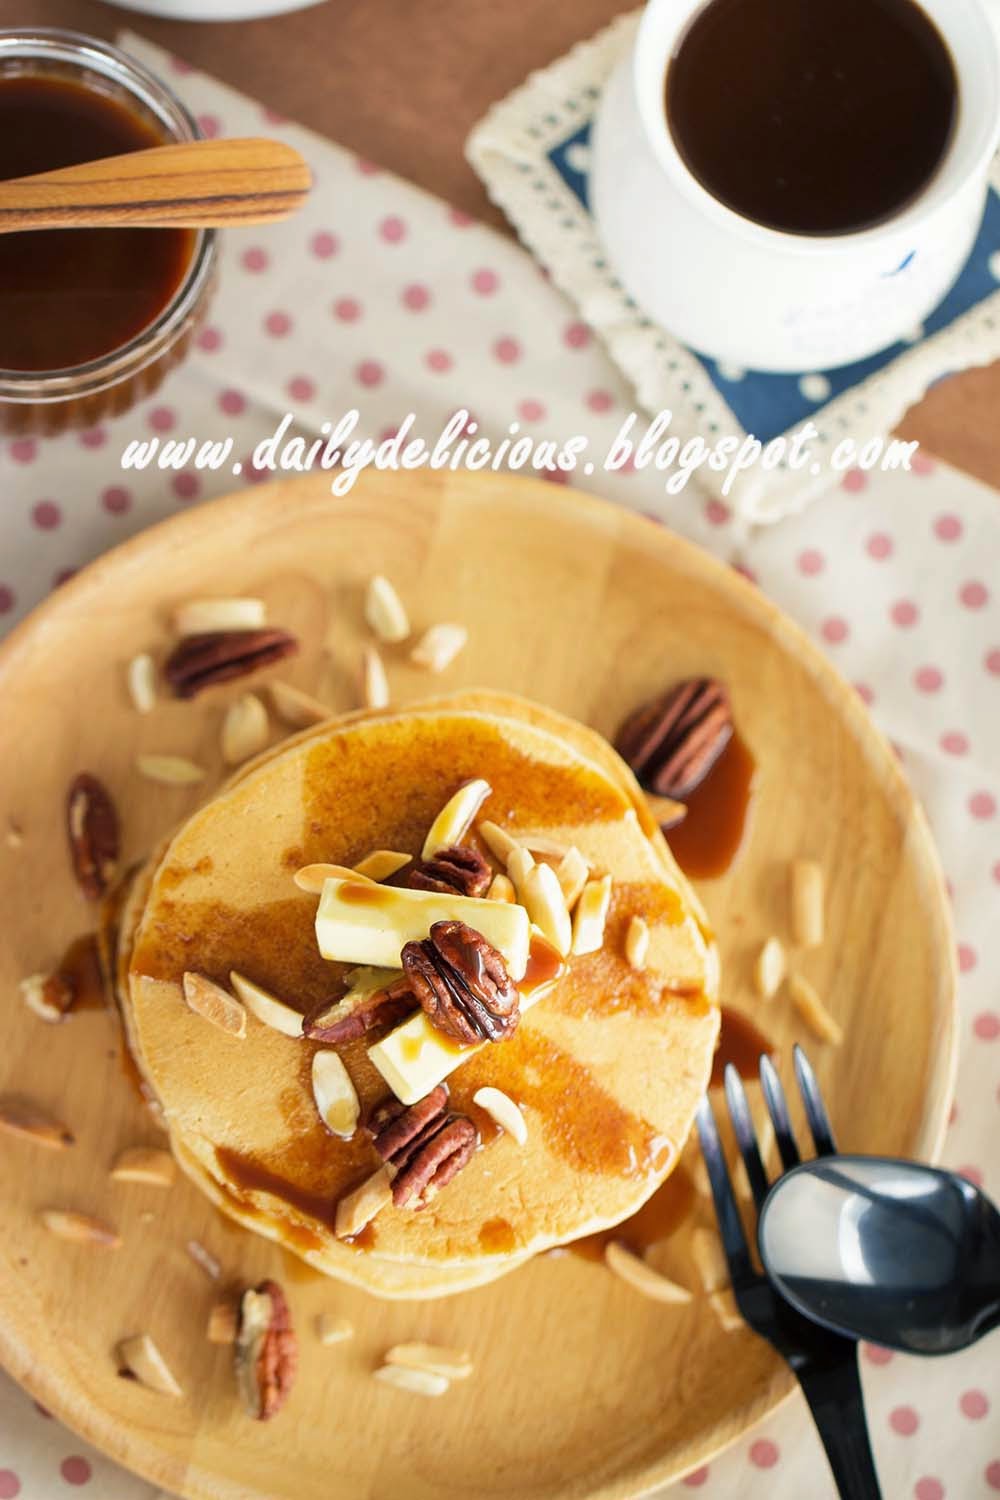 dailydelicious: make to Butterscotch with scotch sugar pancake   Thick brown plain how with flour pancakes toffee